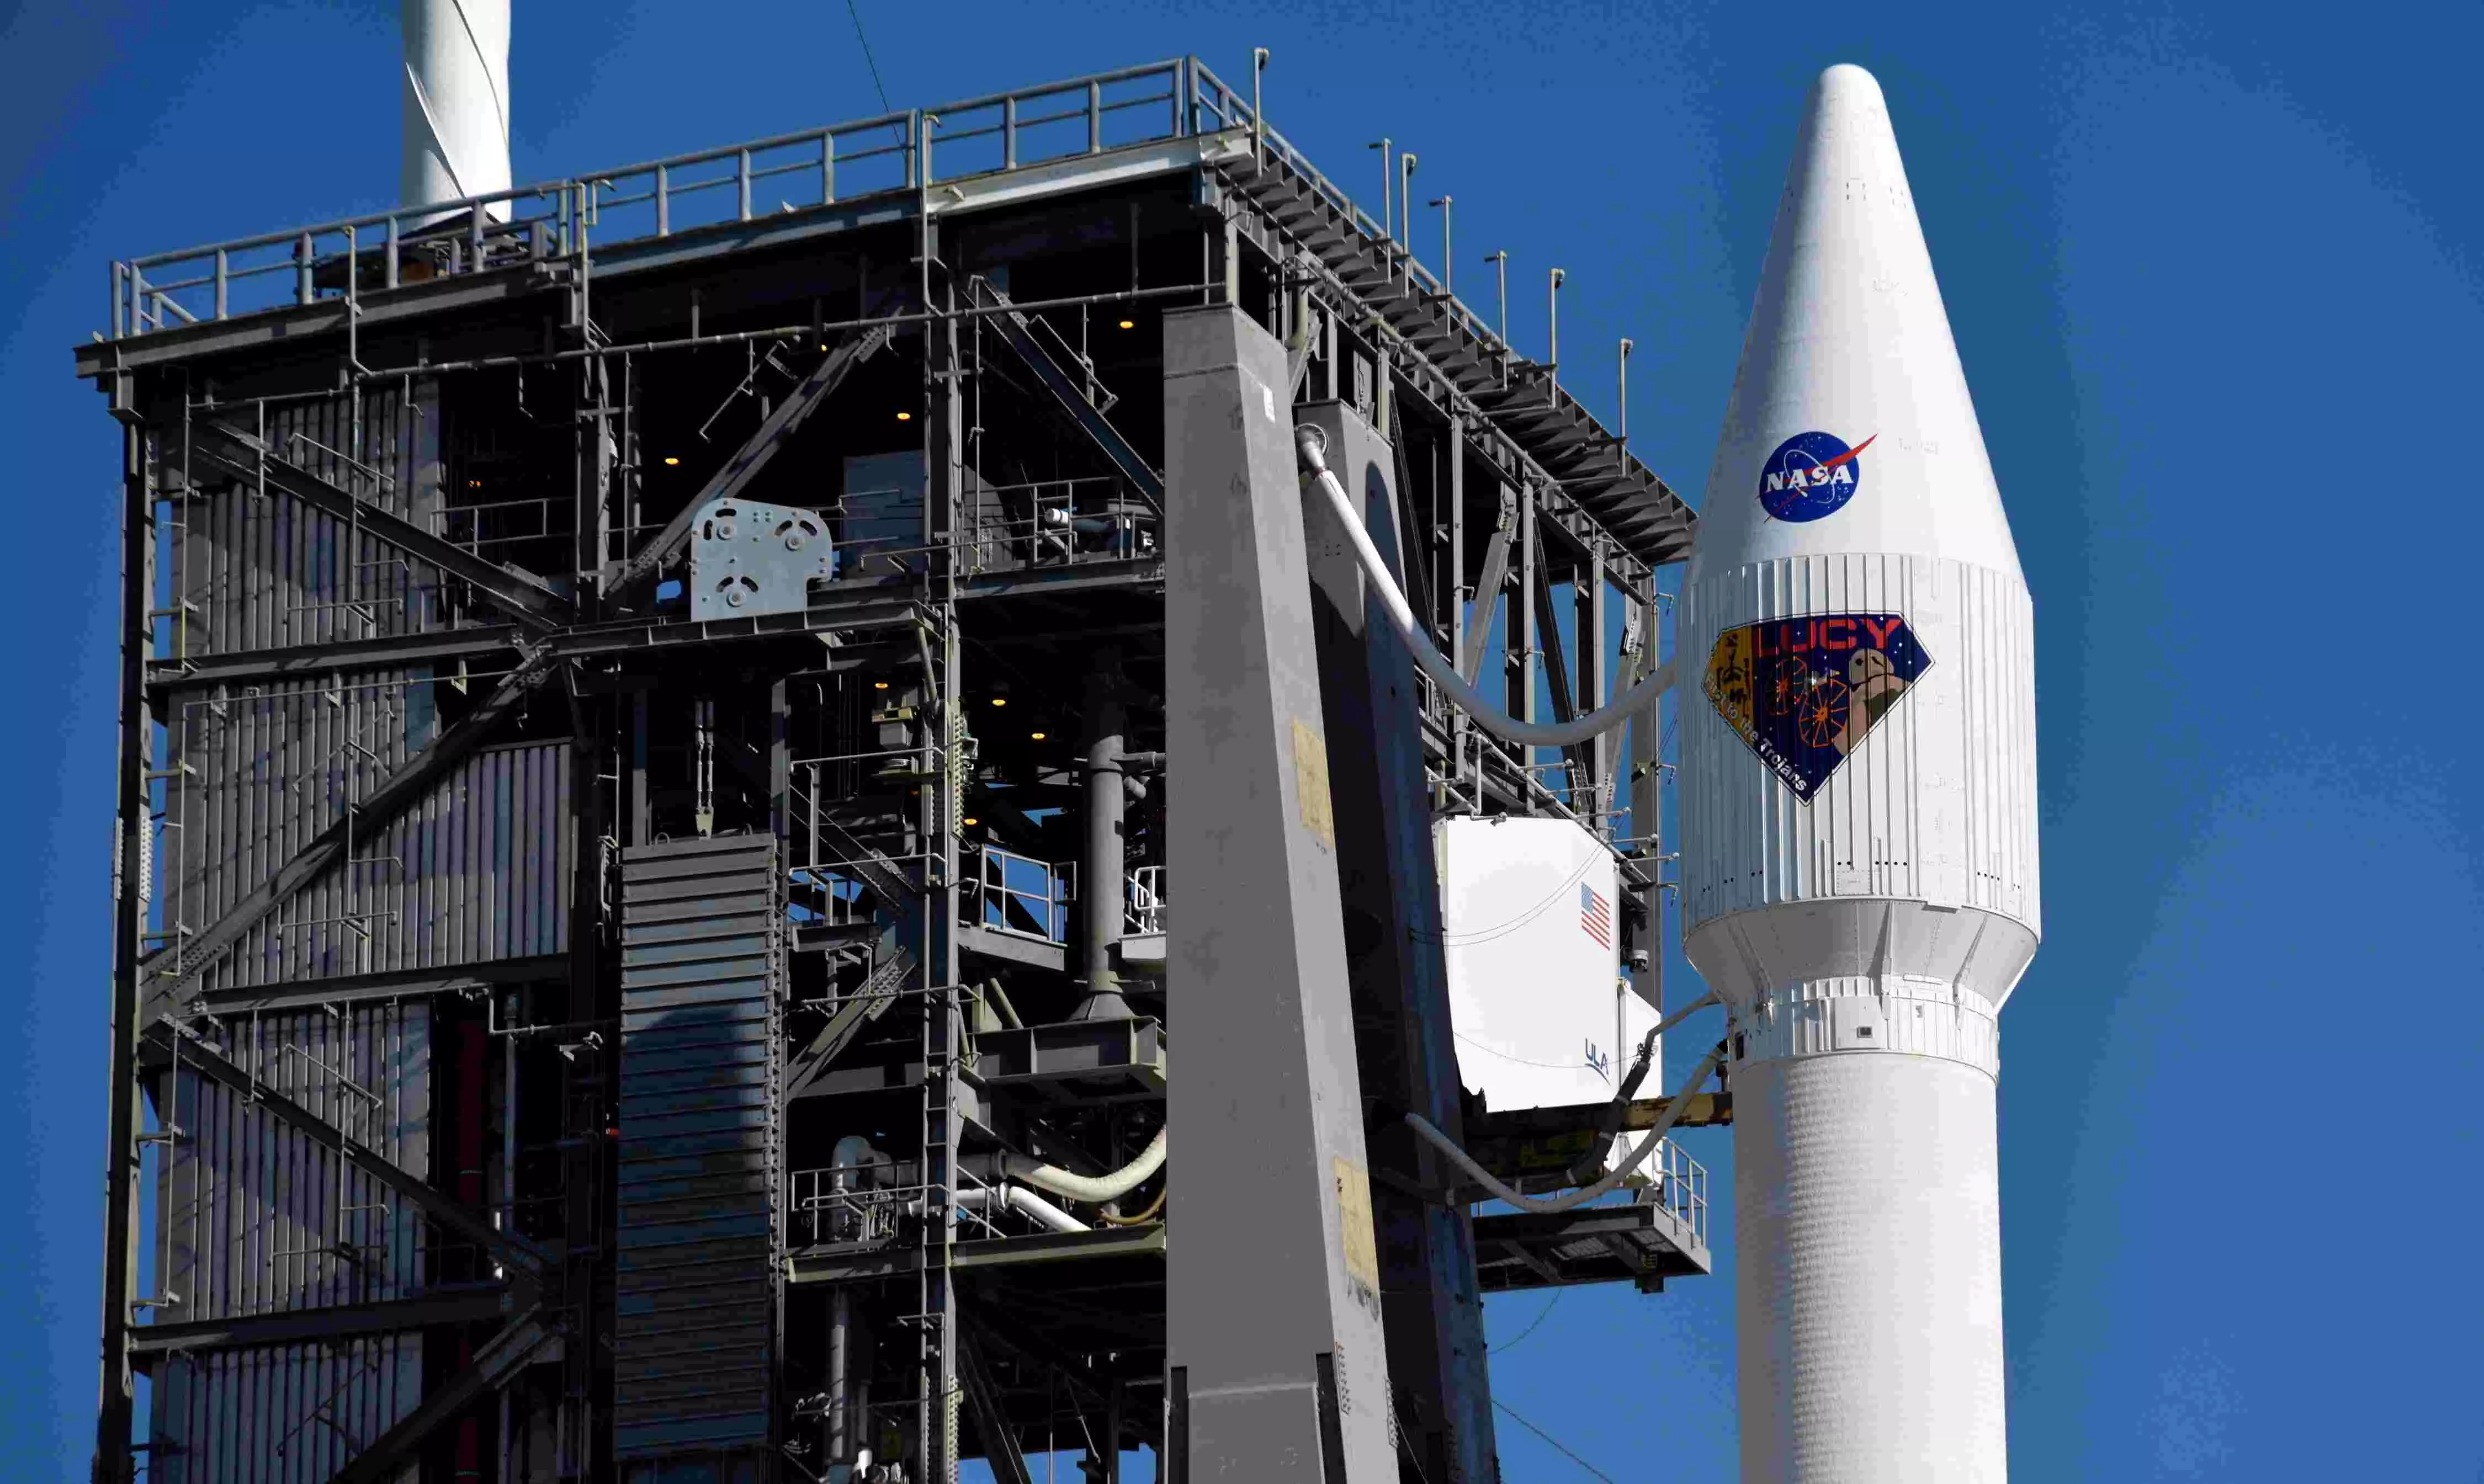 Nasa launches Lucy spacecraft, first space mission to study Trojans Asteroids